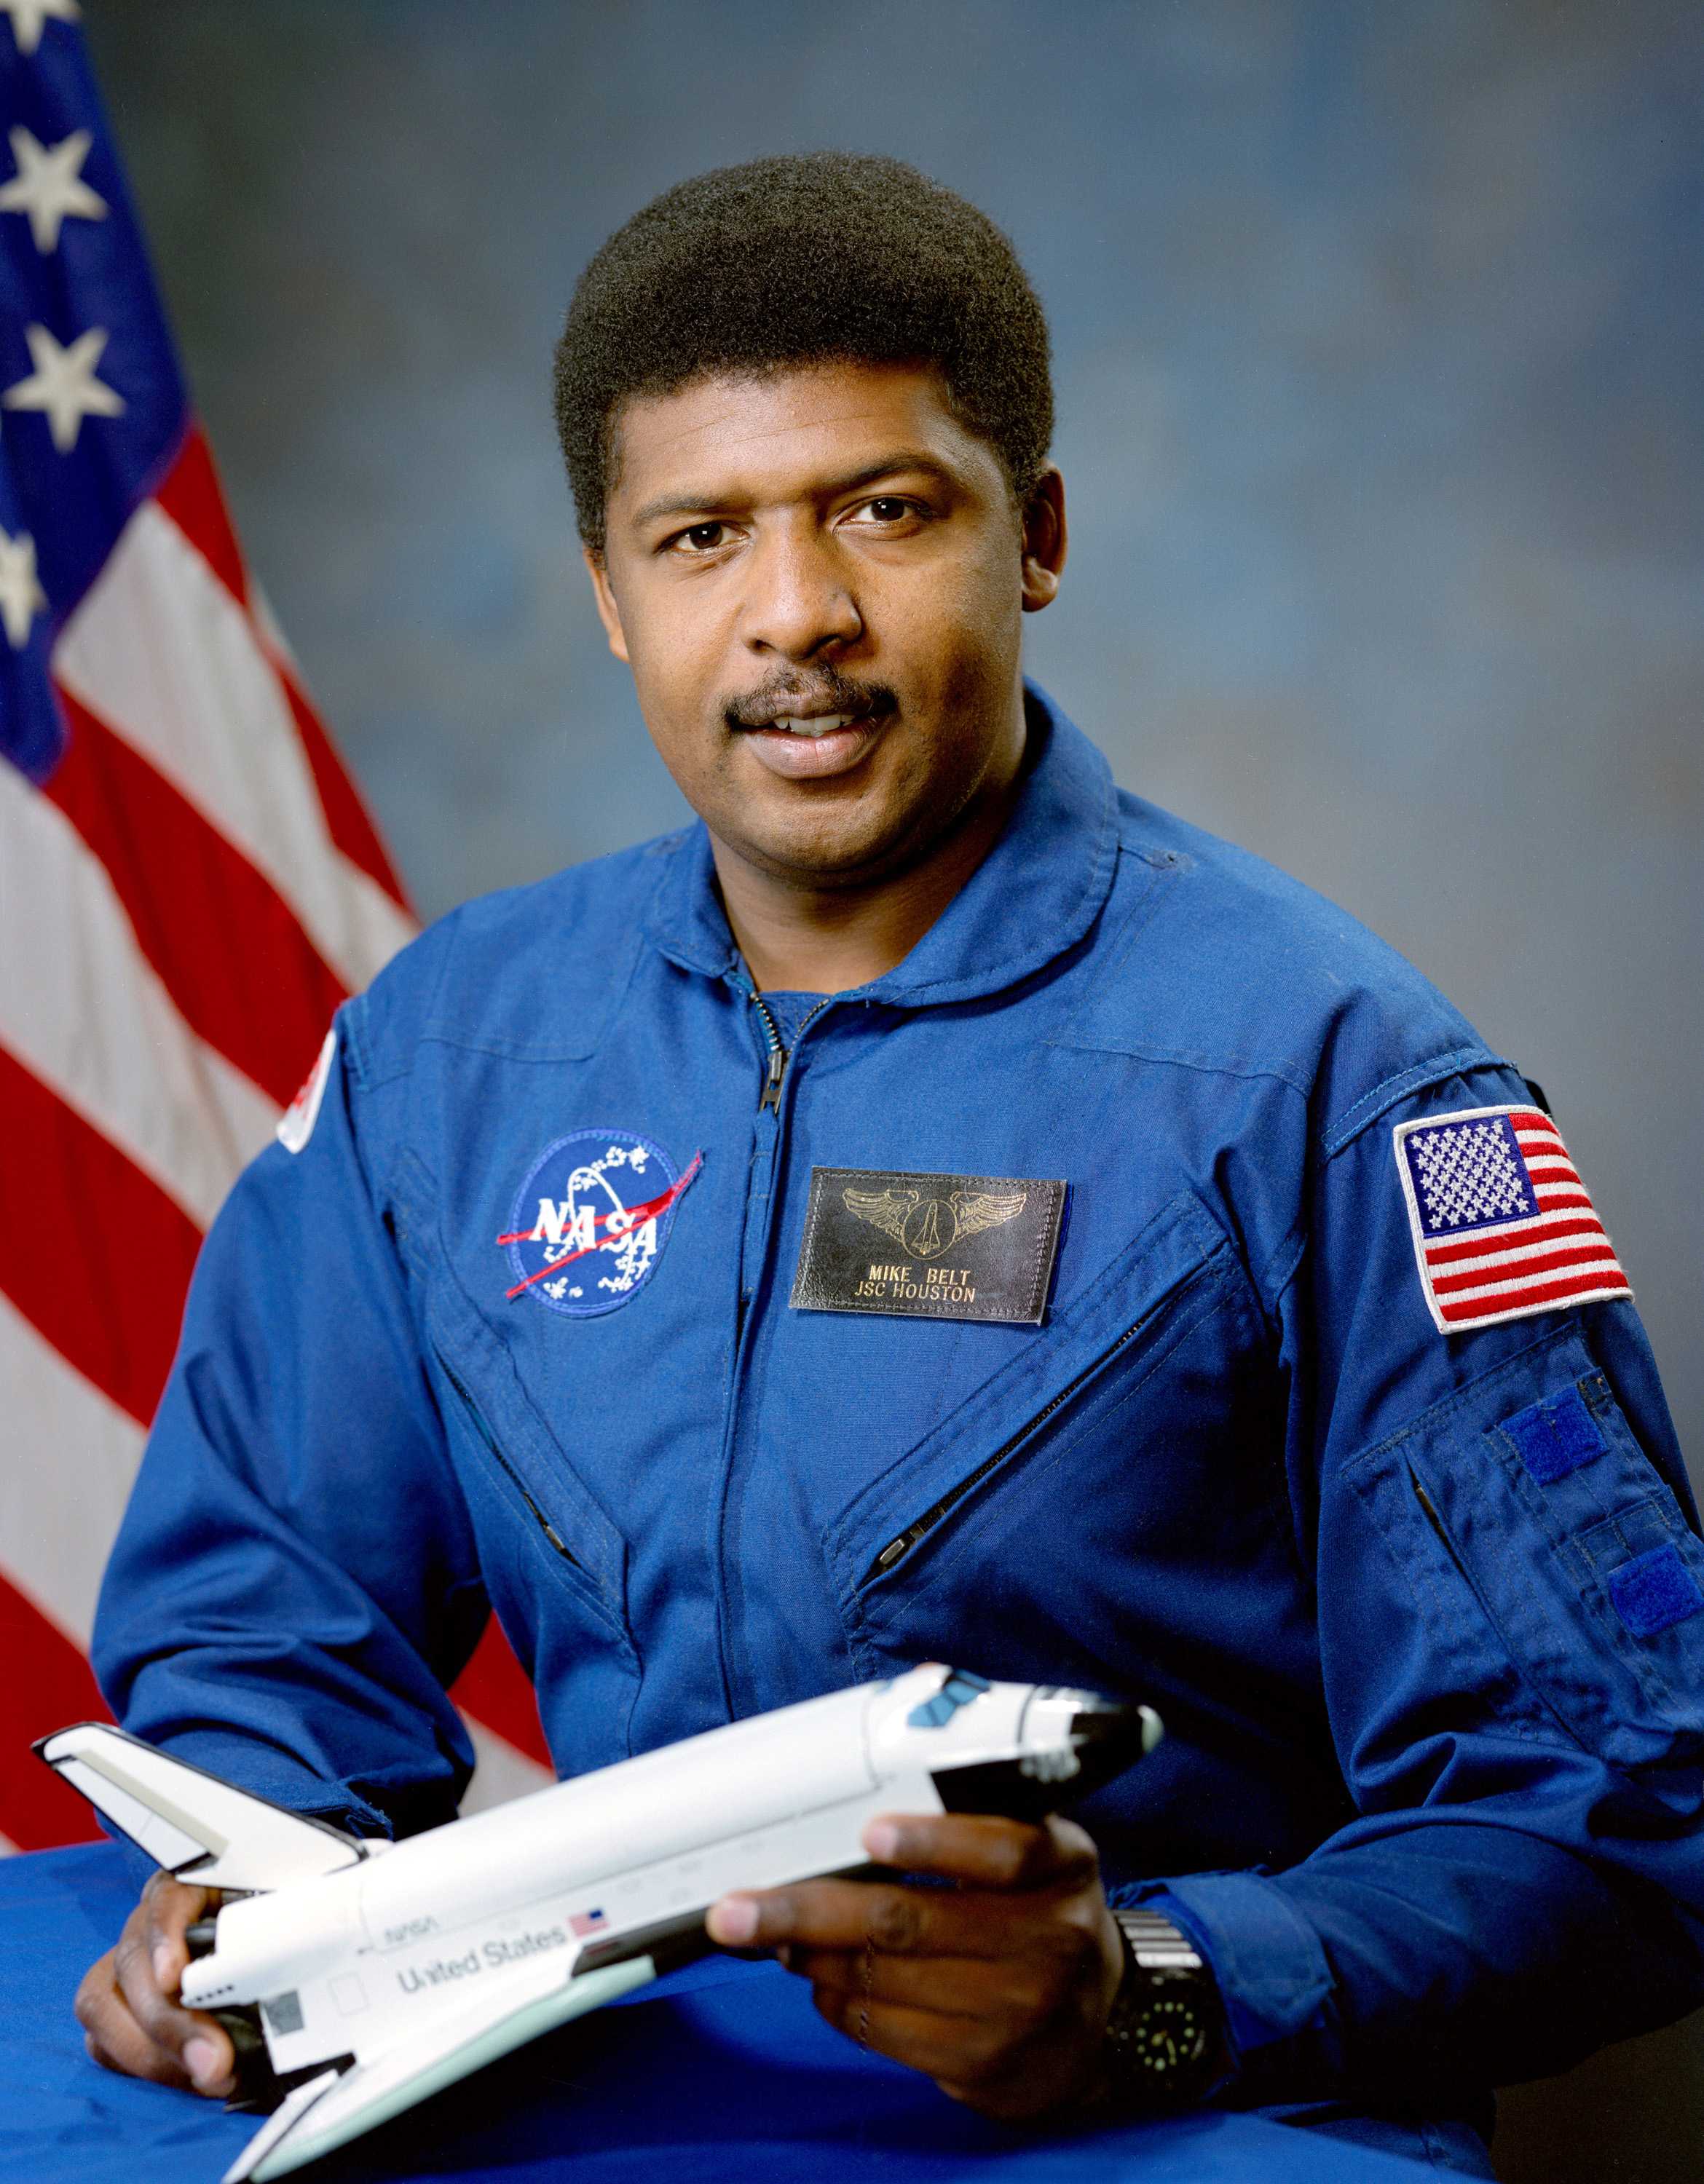 Michael Belt is wearing a blue NASA uniform with a model of a spaceship in his hands as he smiles for the portrait.